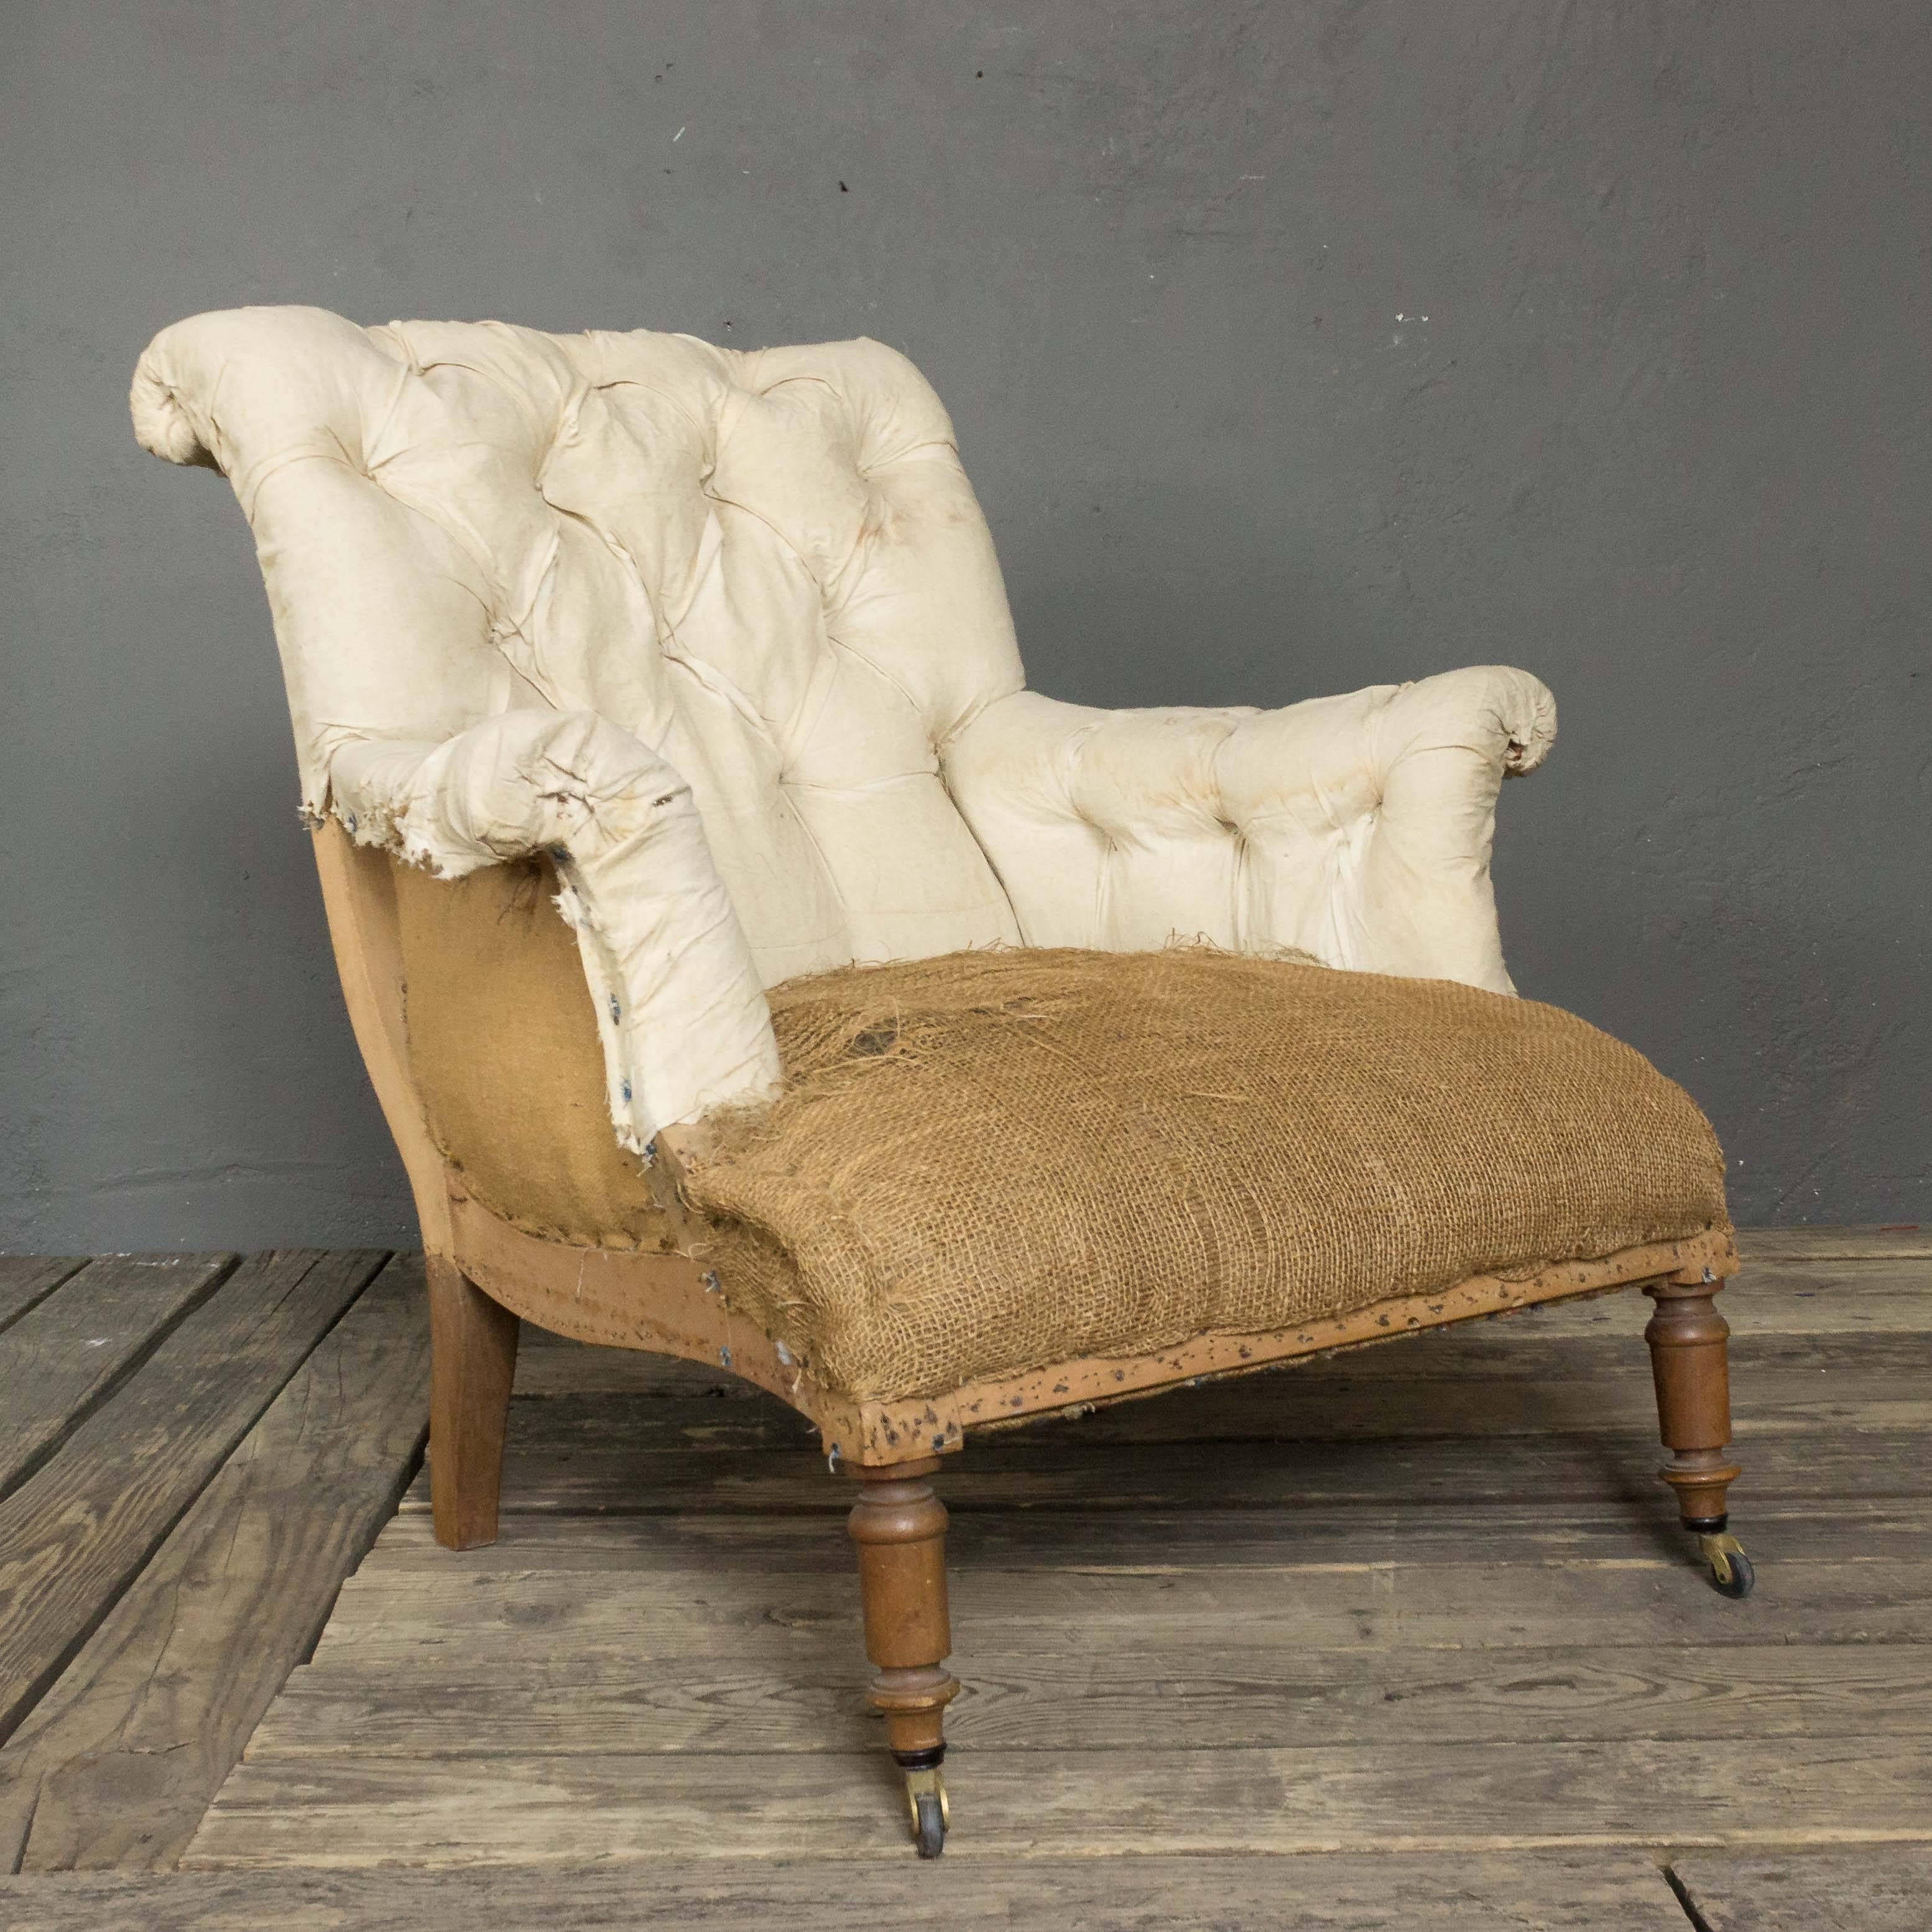 French 19th century Napoleon III armchair with turned legs and rolled back. The chair has been stripped down to the muslin and burlap and is ready to be upholstered. Sold as is.
 